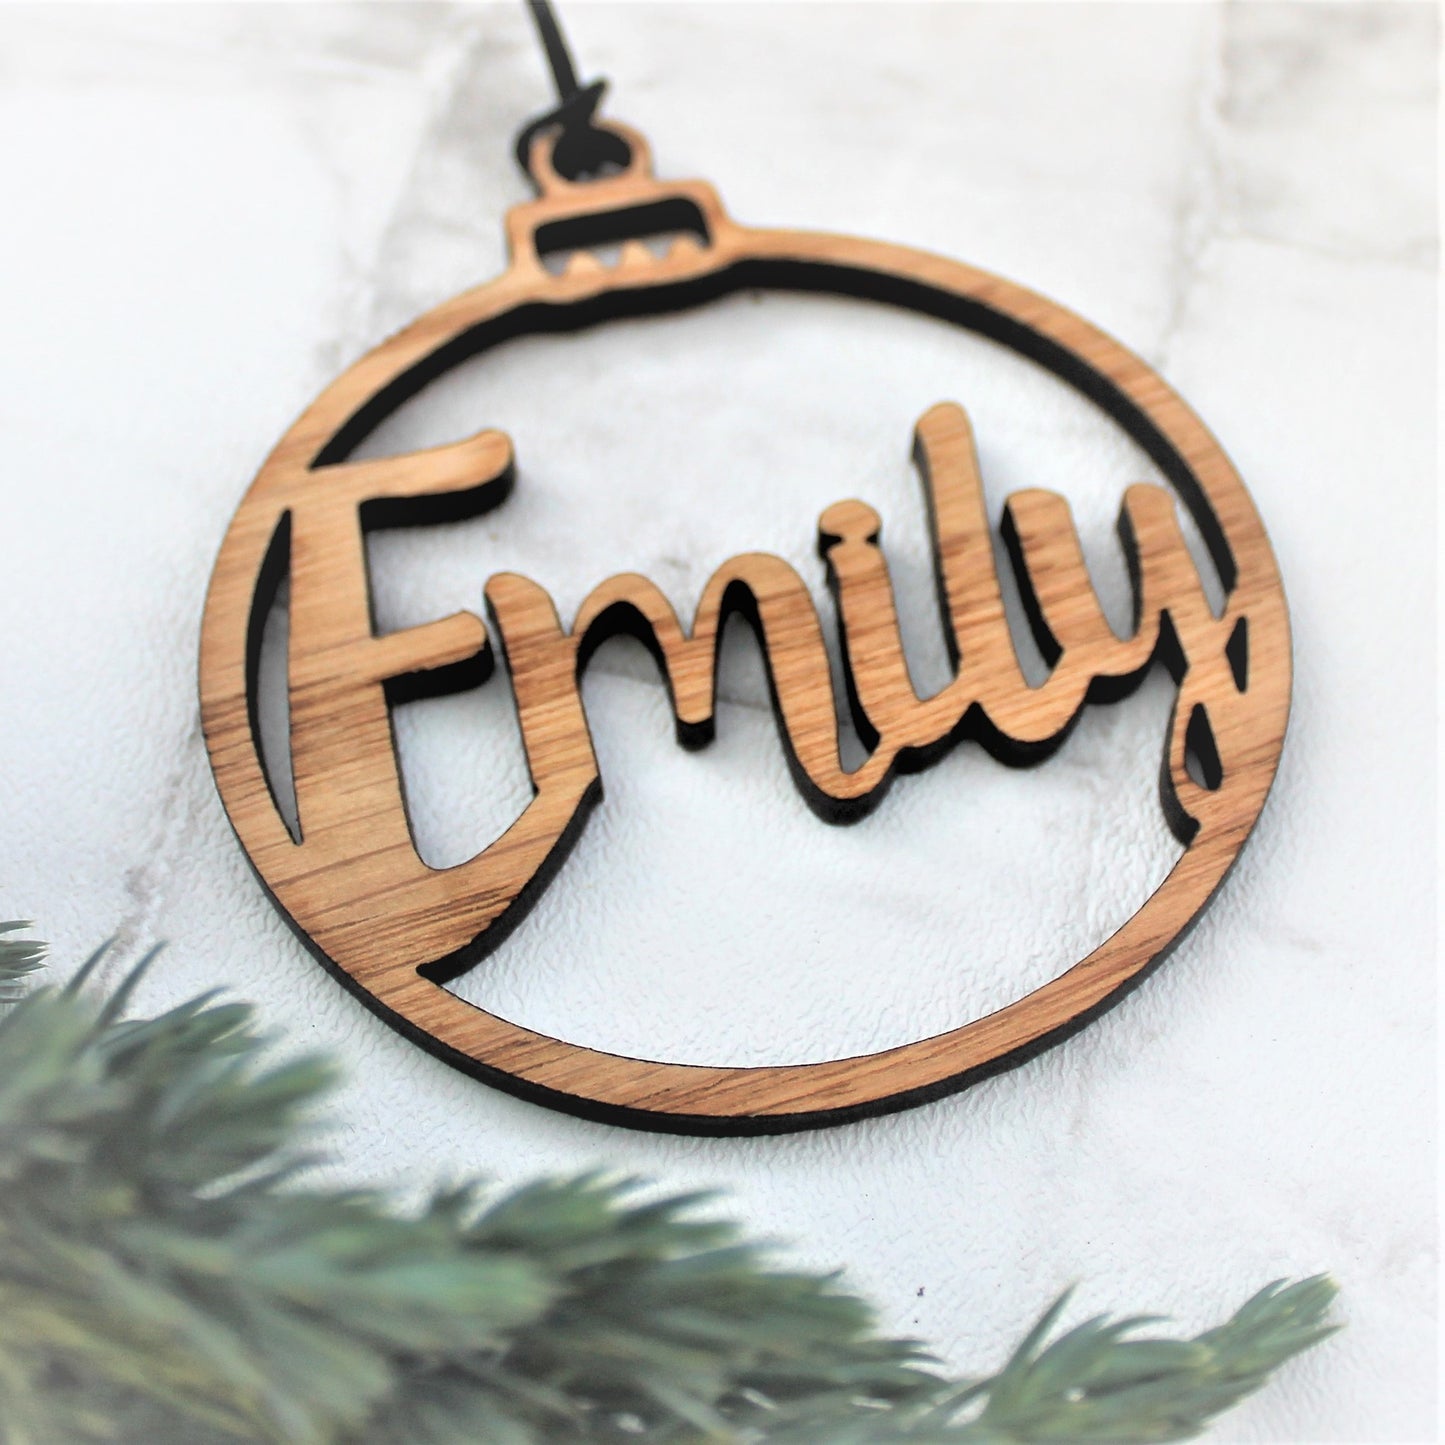 Wooden personalised Christmas tree ornament. Can be used as table place idea at the Christmas  dinner table.